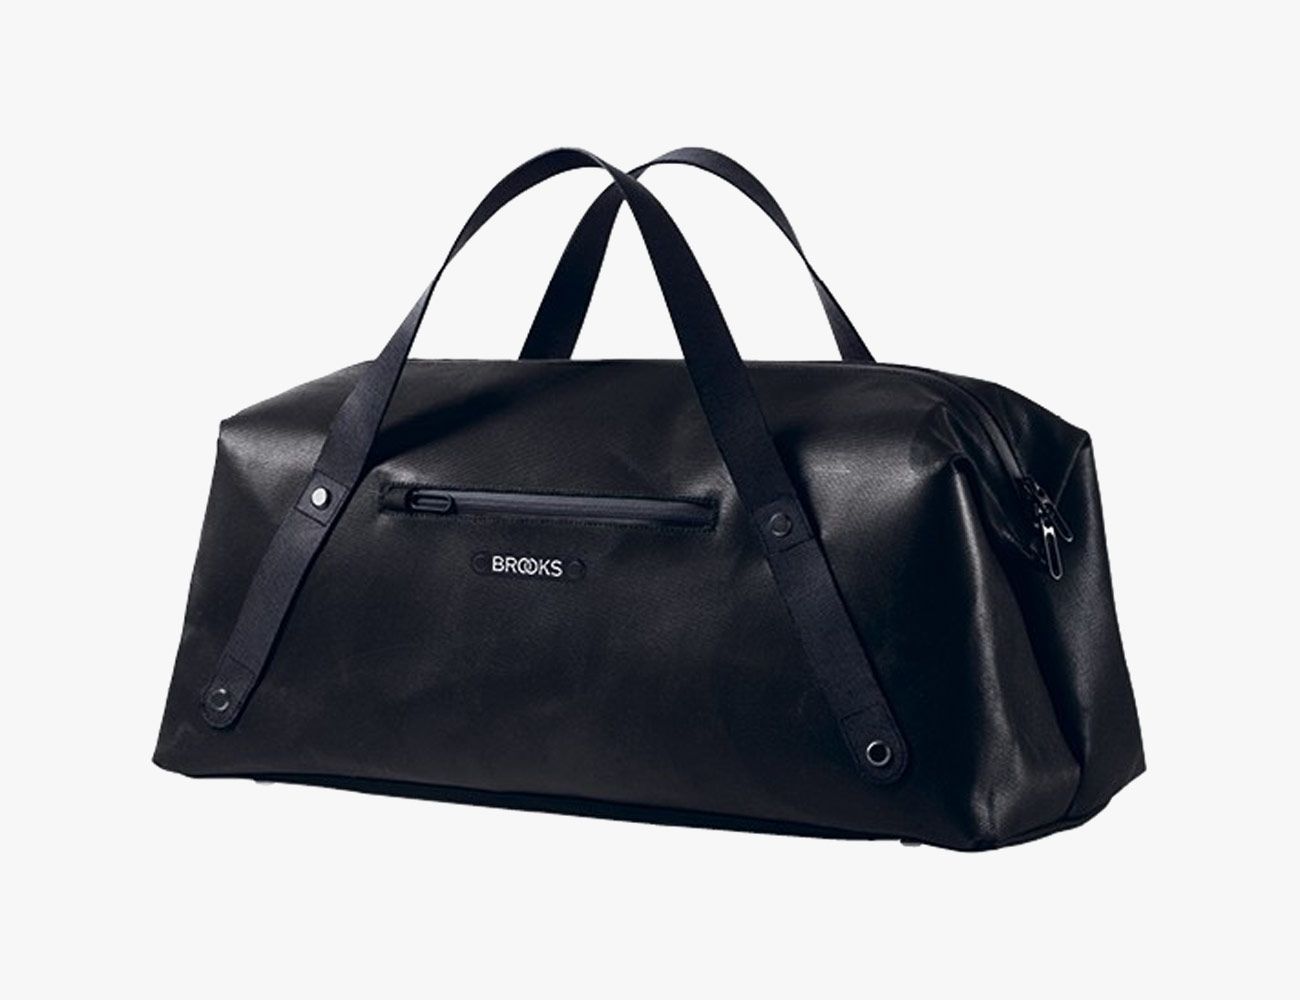 best men's bag for gym and work